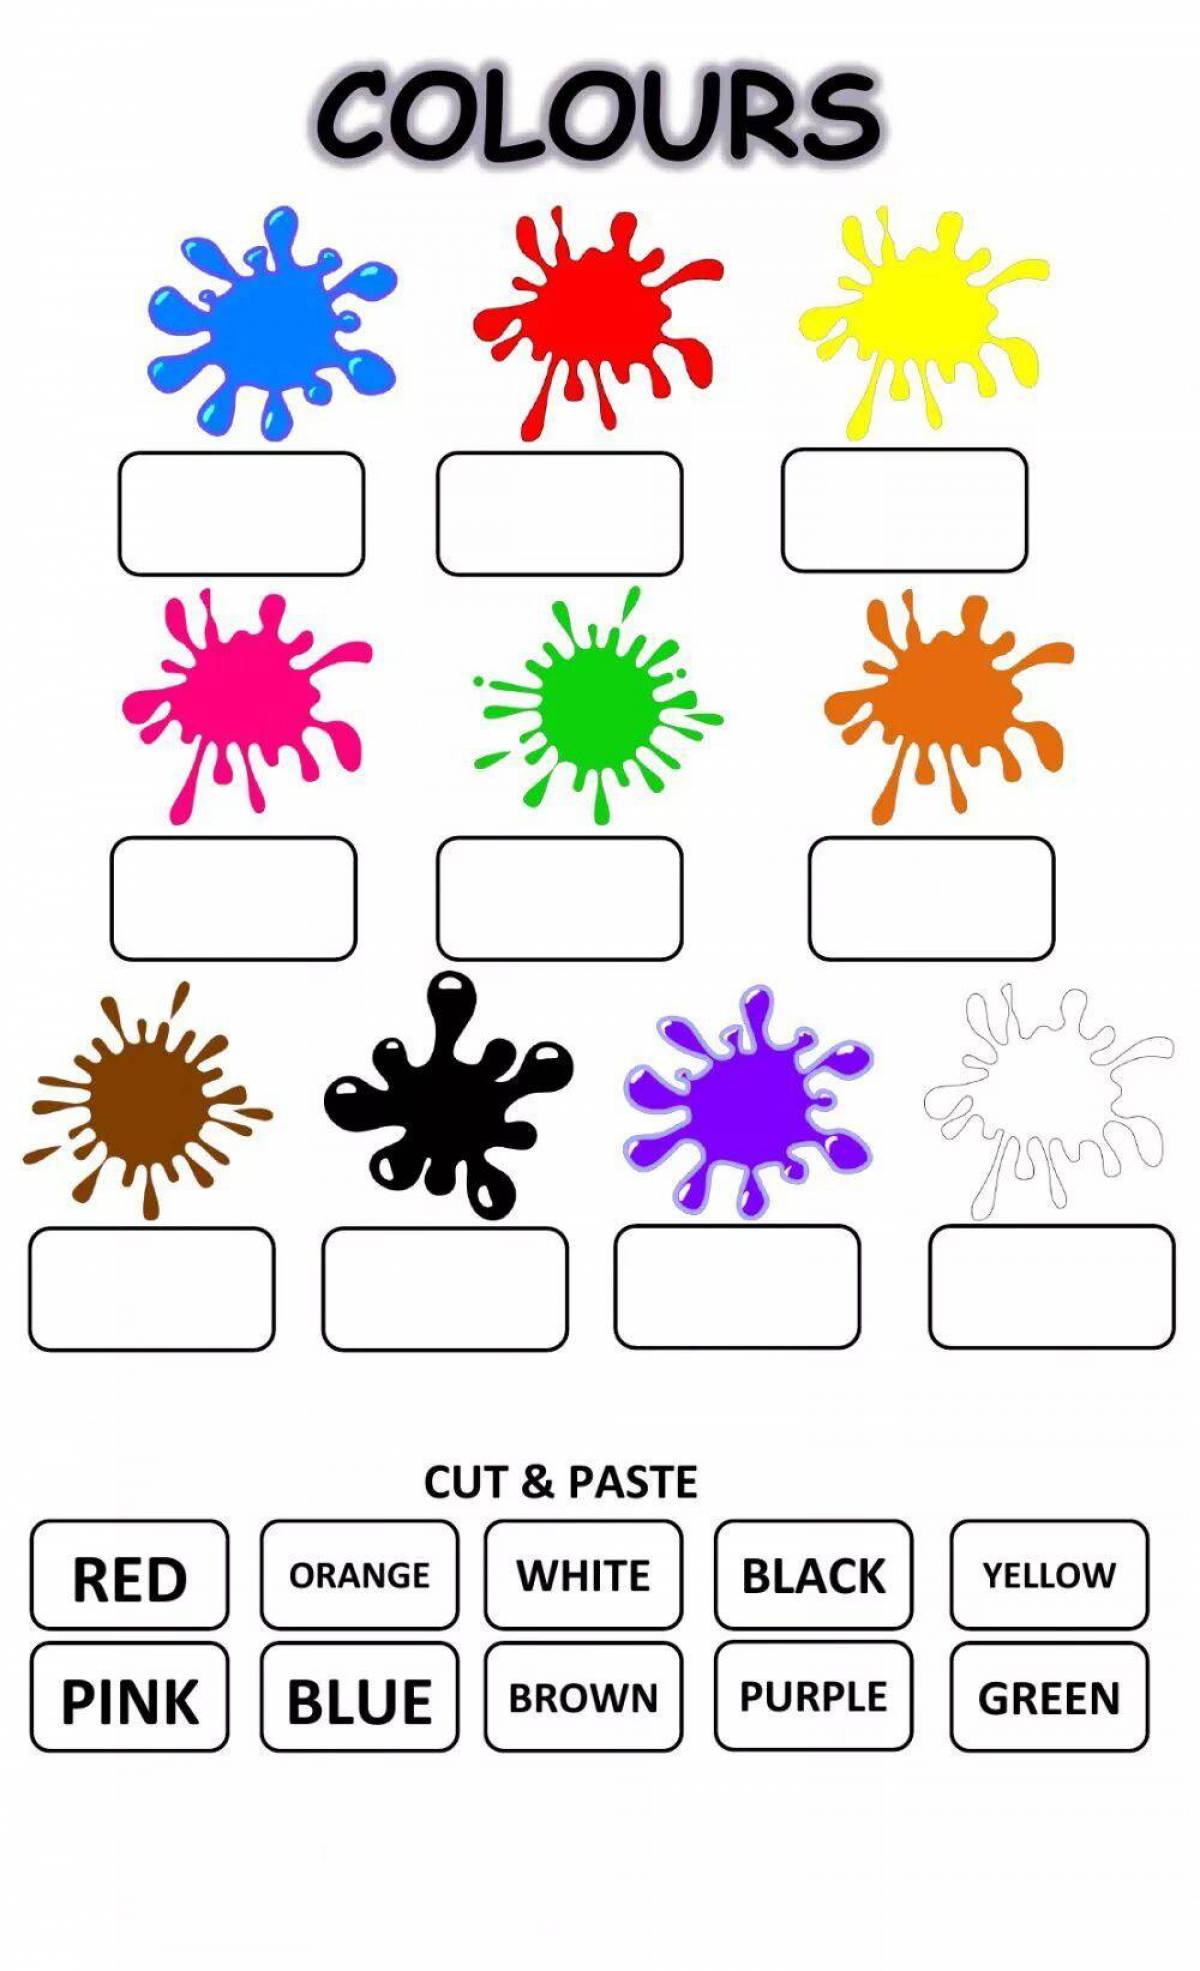 Colors games for kids